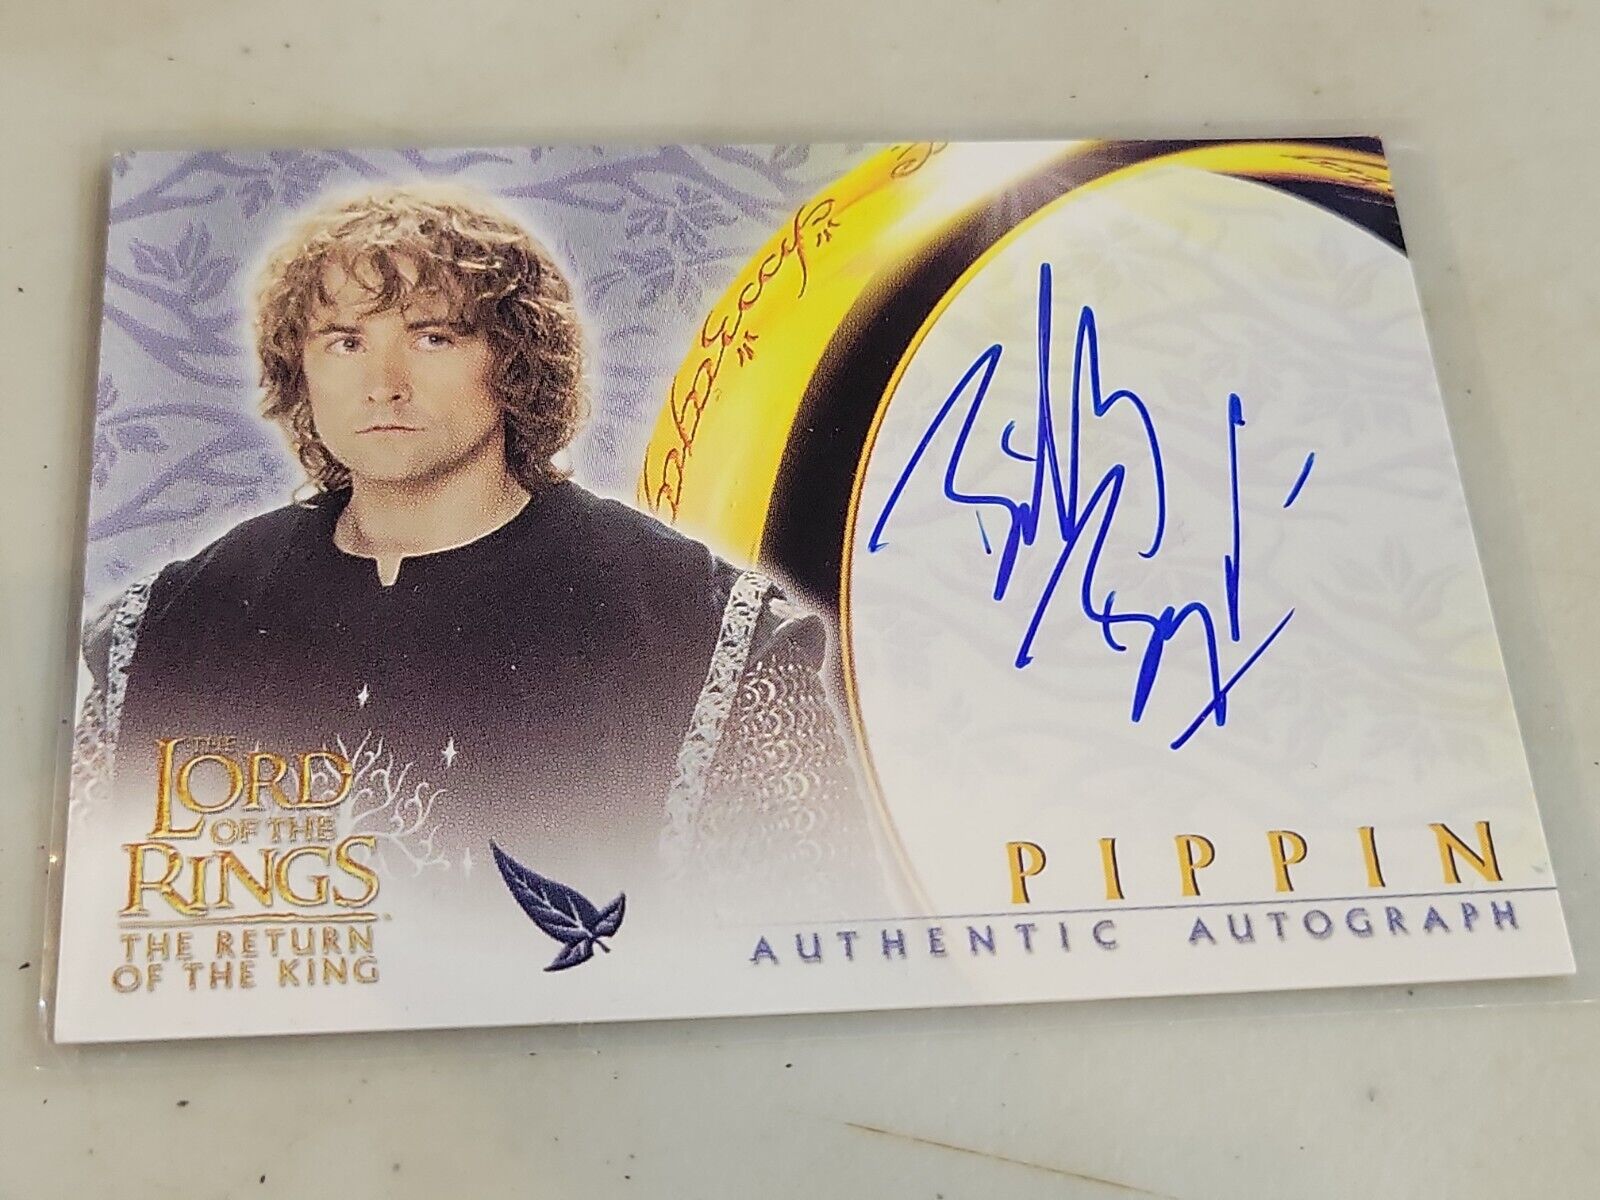 2003 LORD OF THE RINGS RETURN OF THE KING BILLY BOYD AS PIPPIN AUTOGRAPH CARD